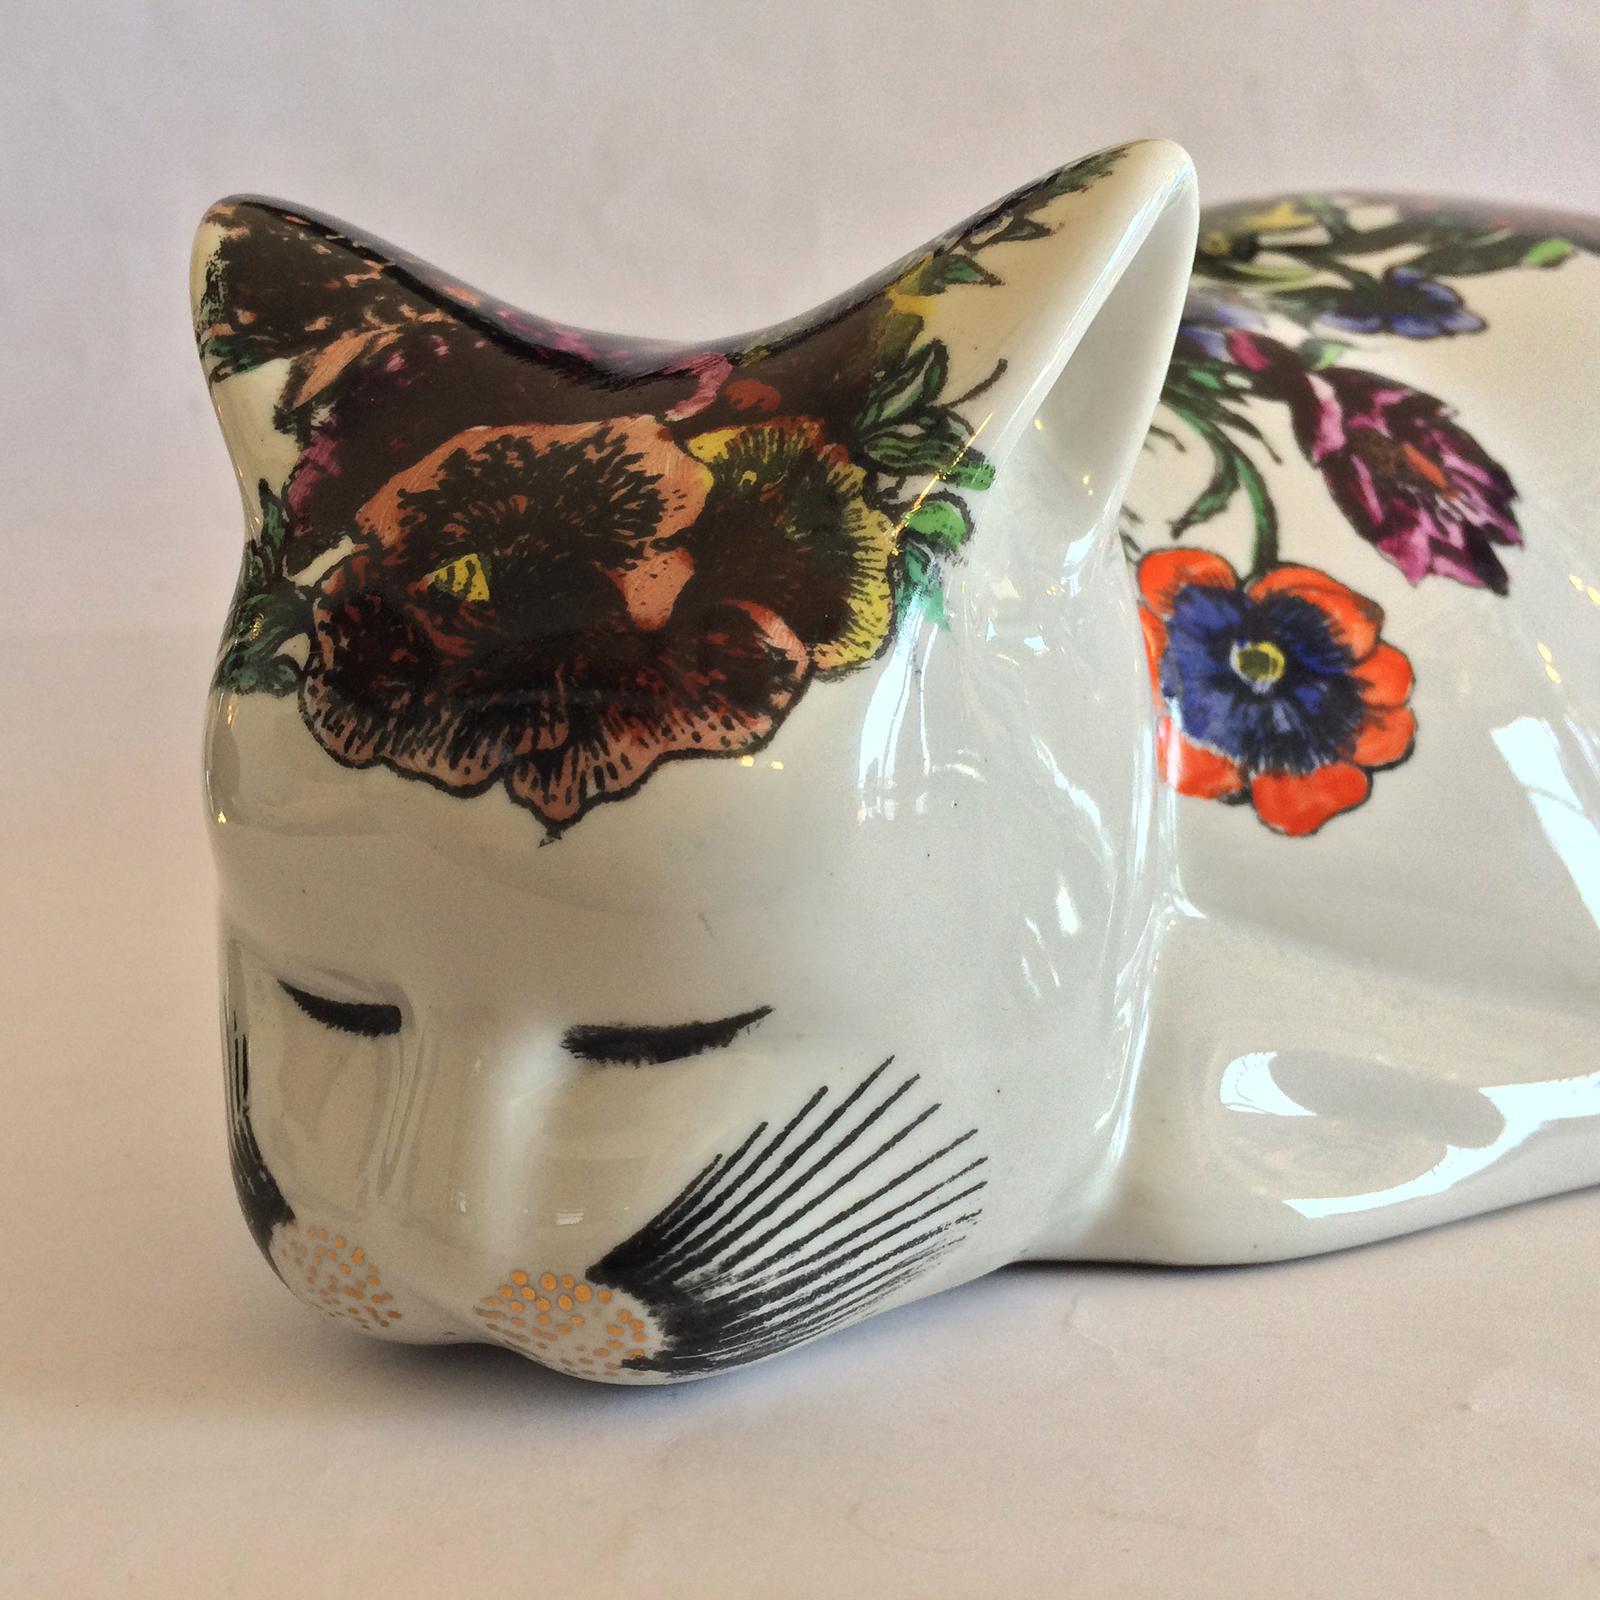 Midcentury rare large white cat by Piero Fornasetti. To the base, is the ”Artist’s hand with brush”, within a star pointed circle, with “FORNASETTI MILANO”, followed by “MADE IN ITALY” all around the inner perimeter; also has the gilt script with